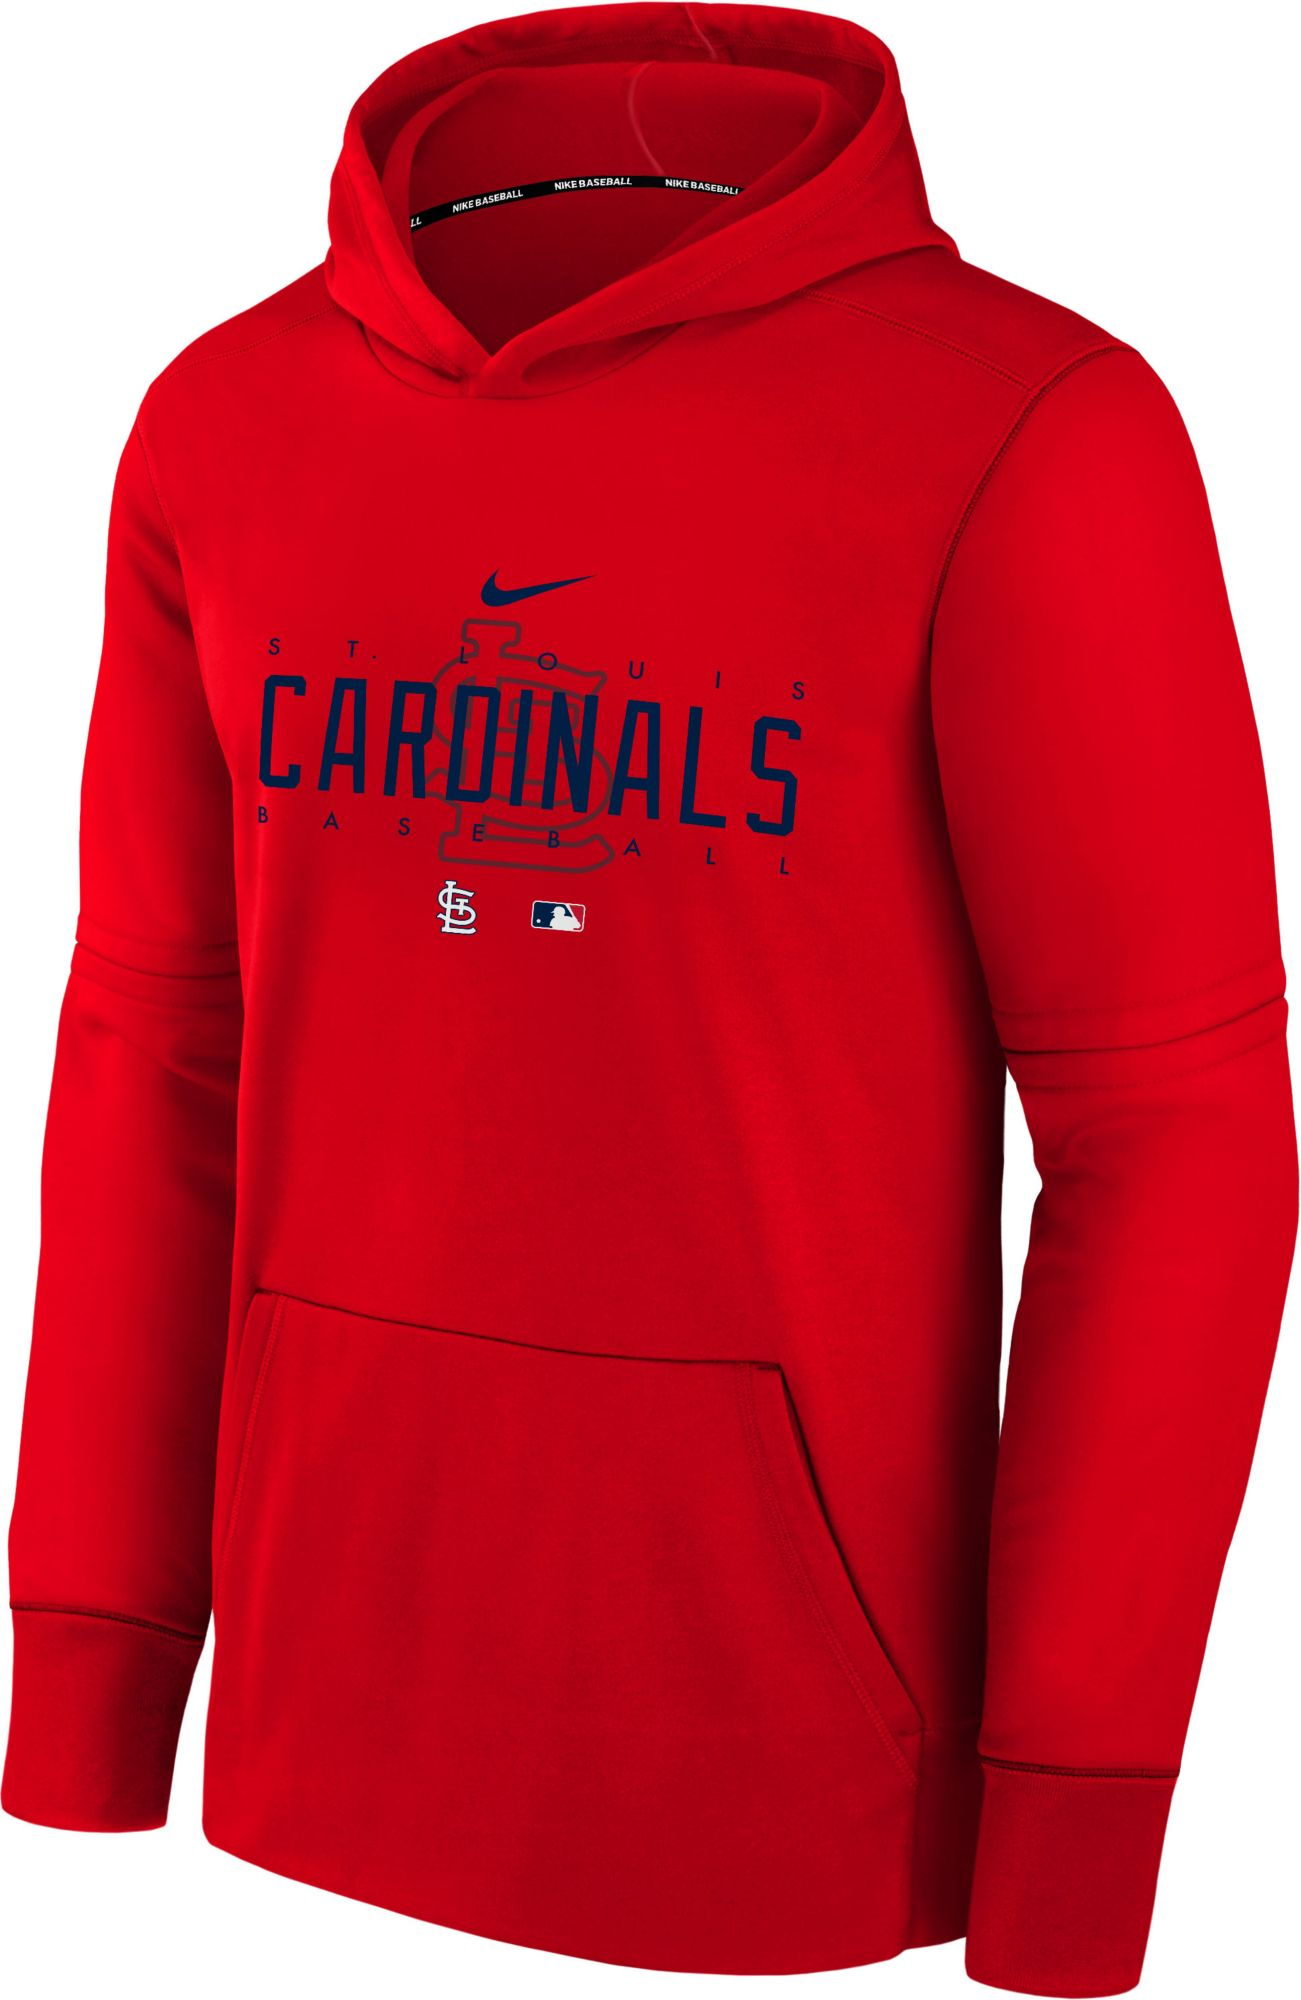 Nike Youth St. Louis Cardinals Red Pregame Hoodie, Boys', Small